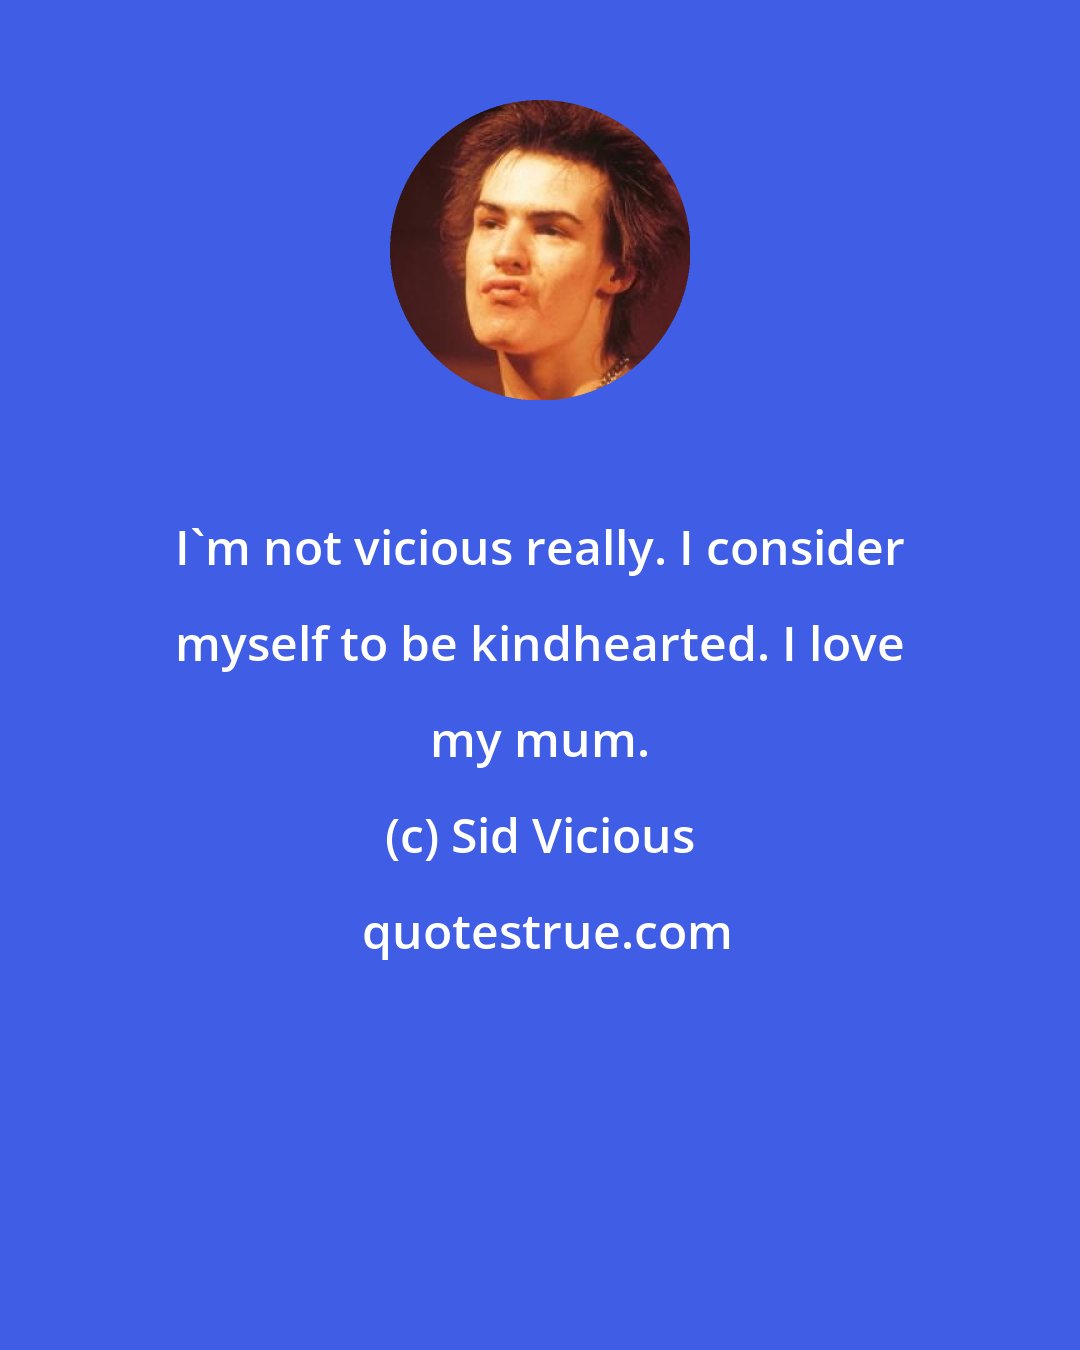 Sid Vicious: I'm not vicious really. I consider myself to be kindhearted. I love my mum.